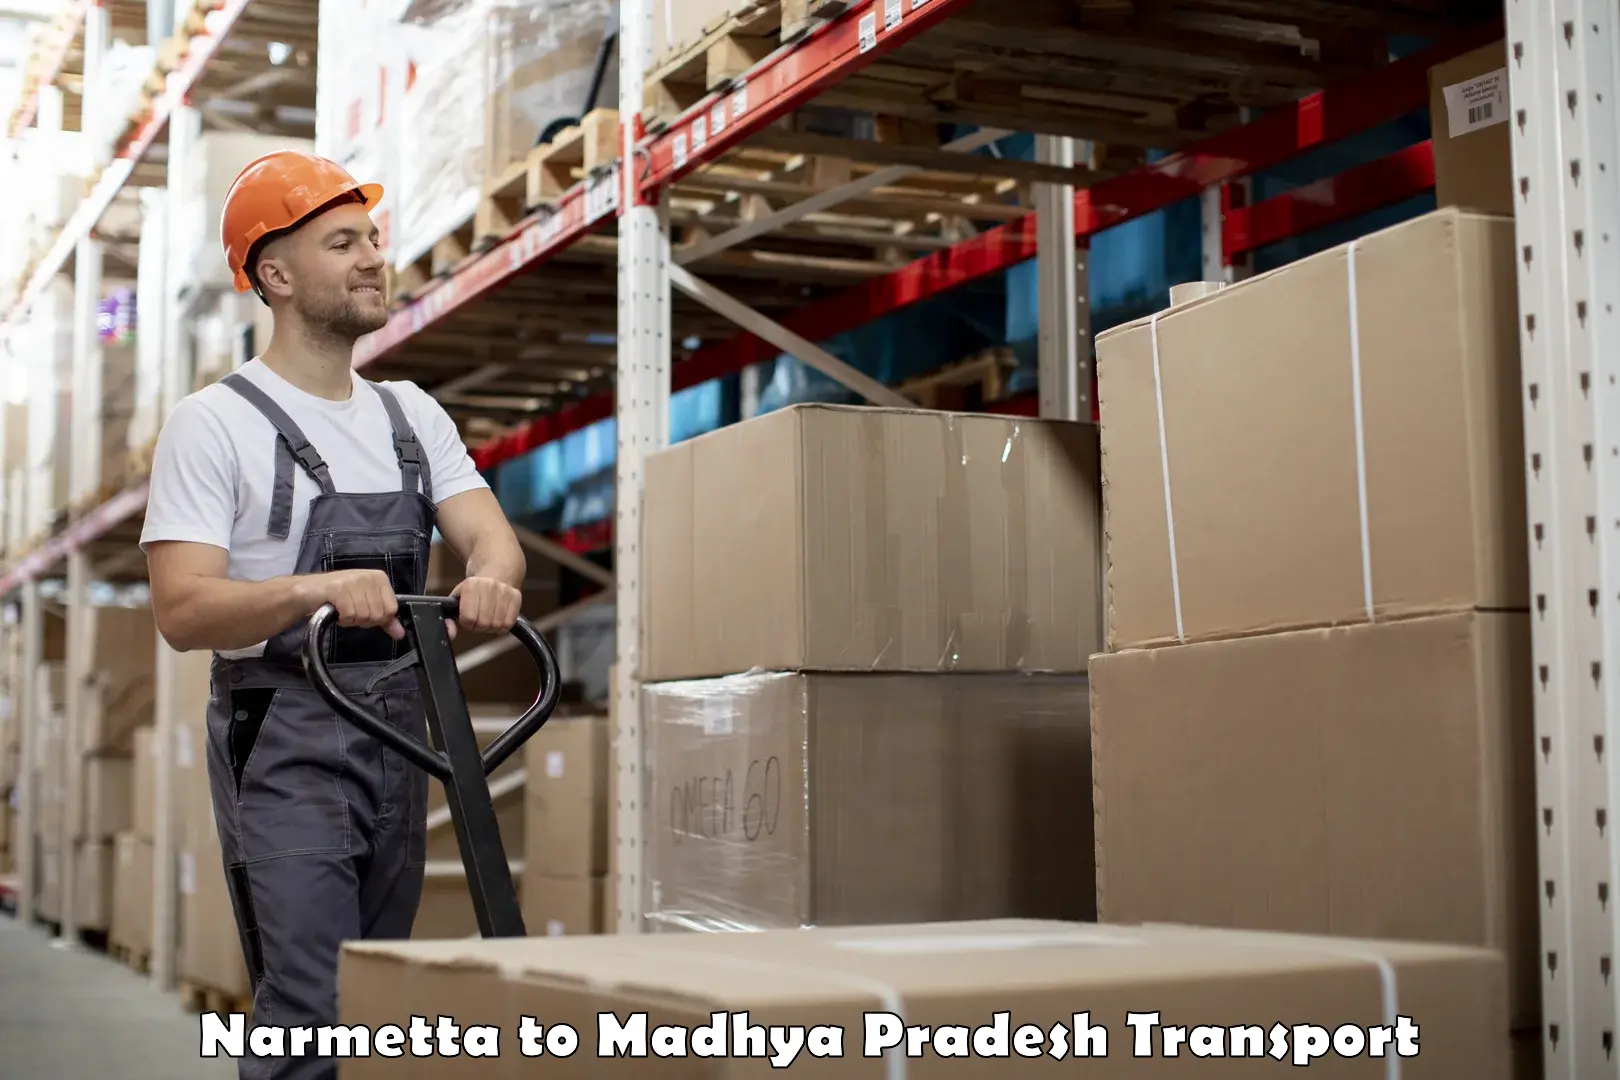 Commercial transport service Narmetta to Indore